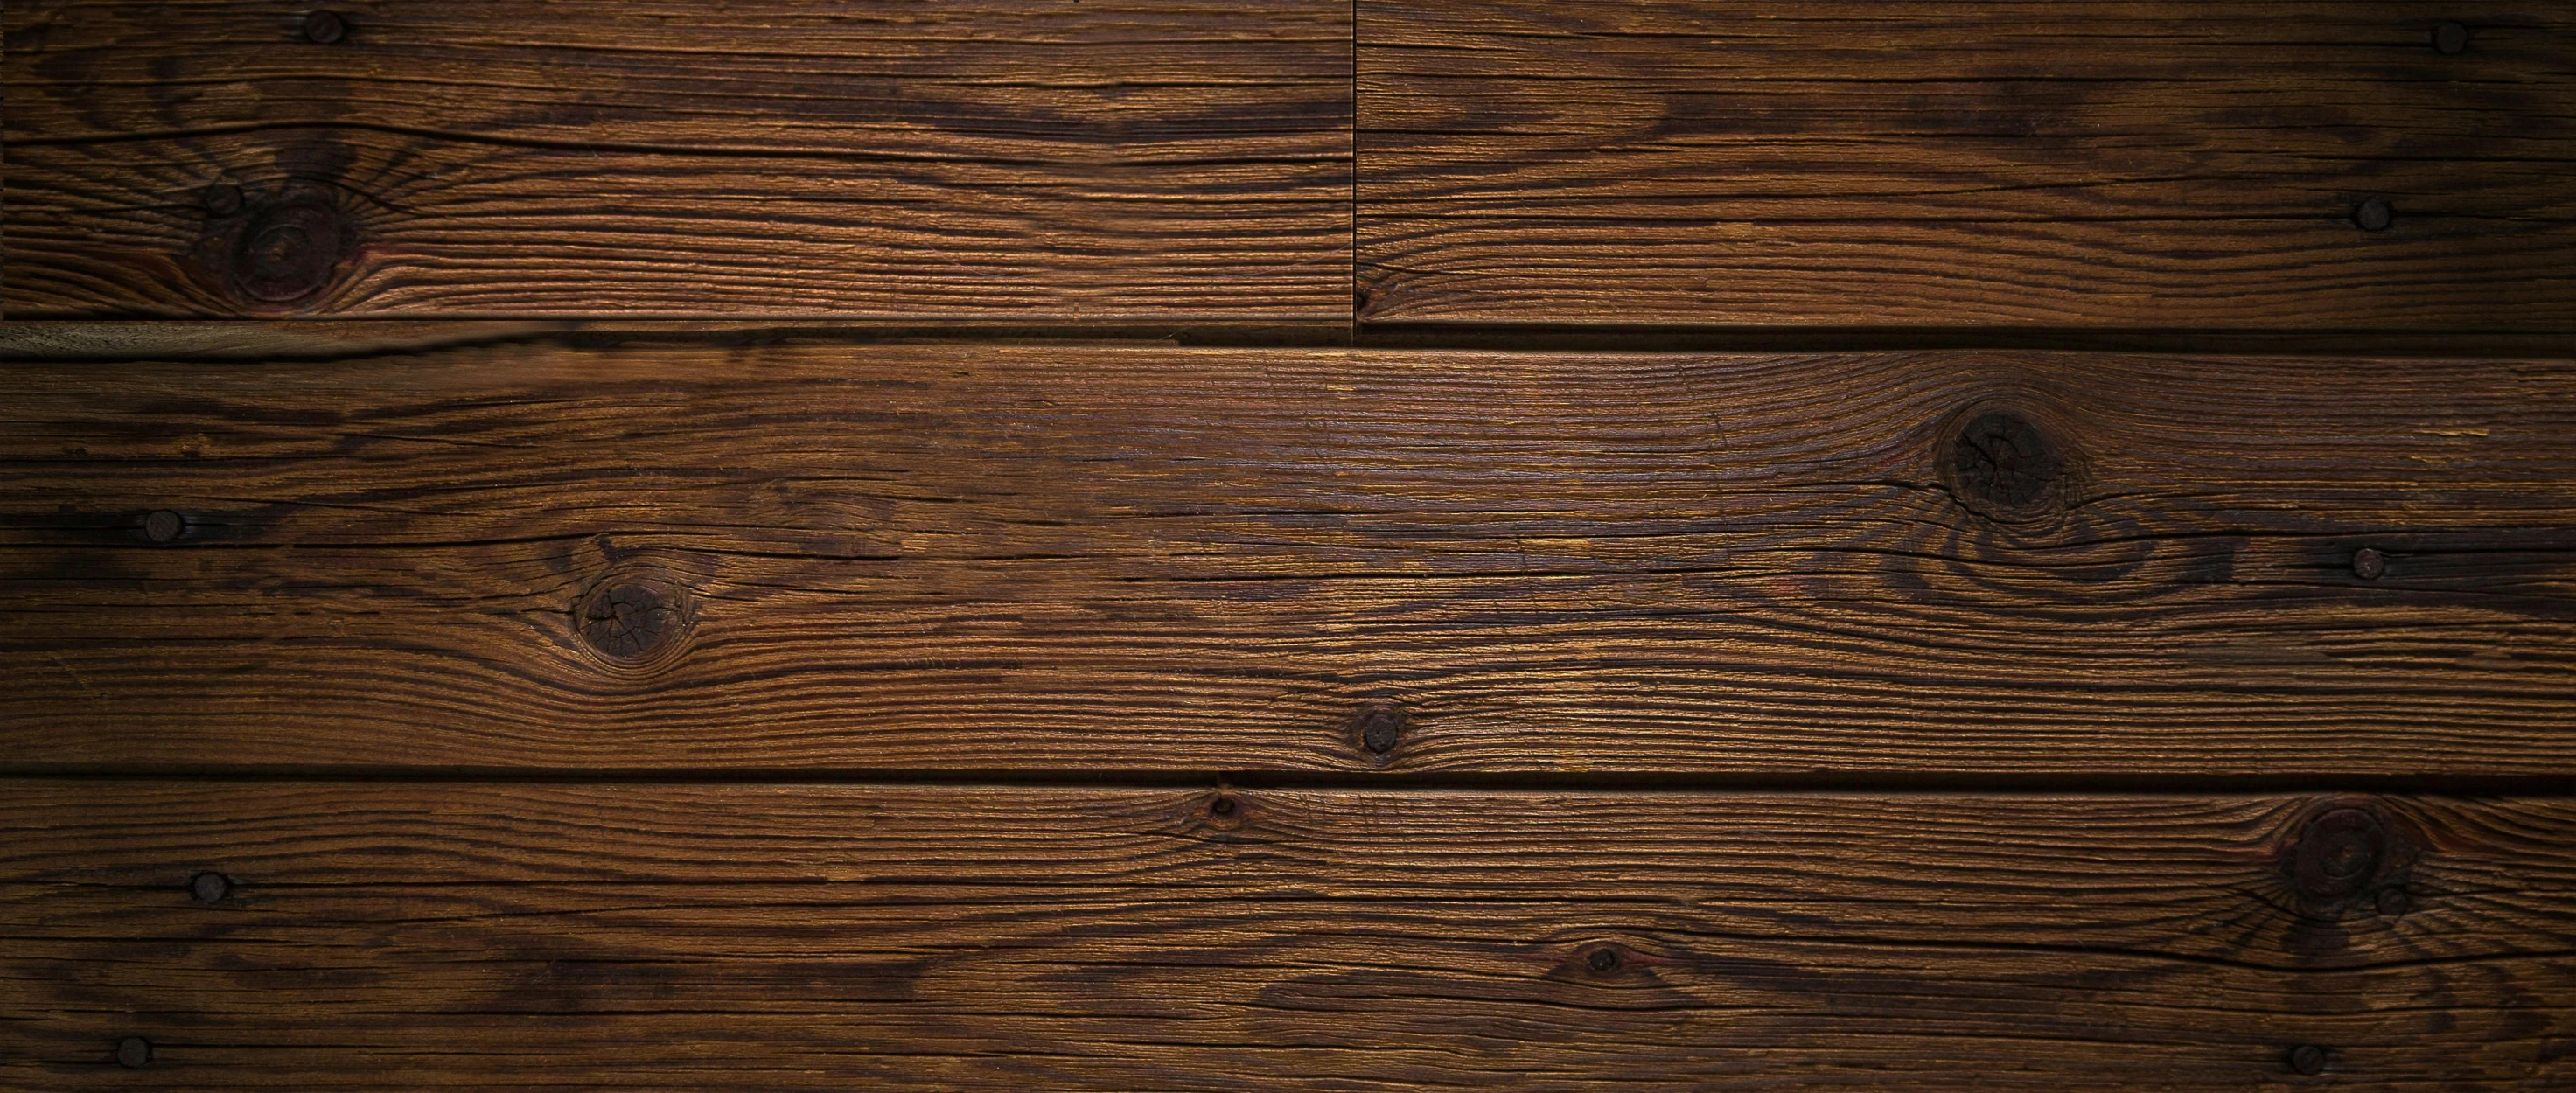 a close up view of a wooden wall